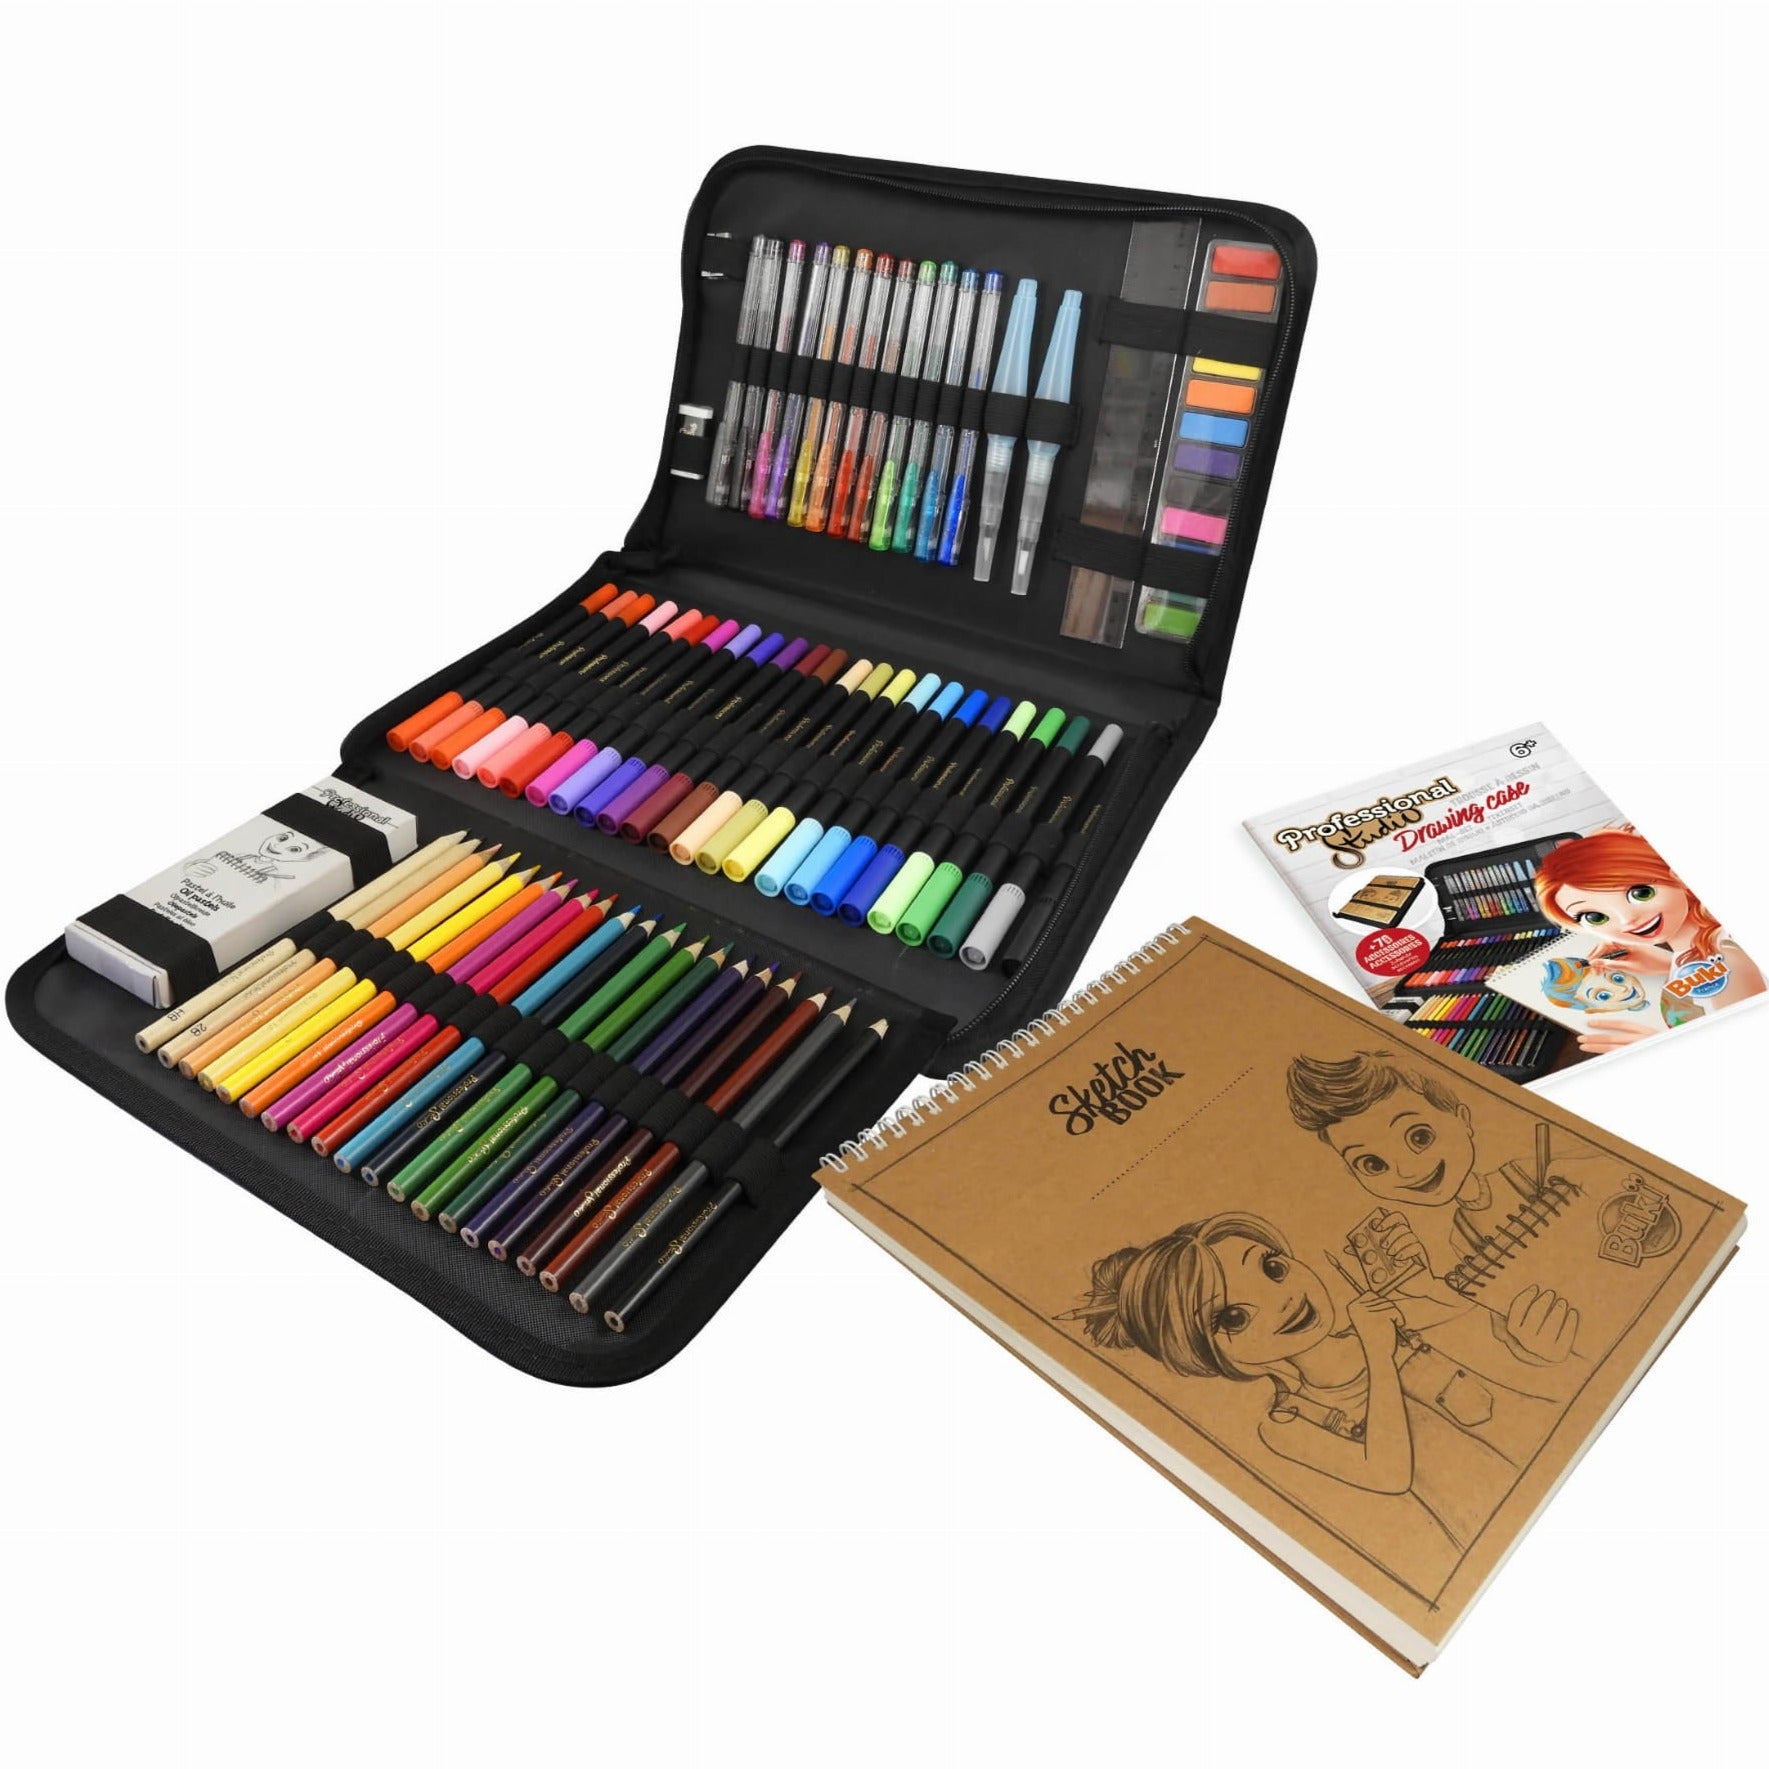 Buki: Small artist's folder with Sketchbook Professional Studio Drawing Case